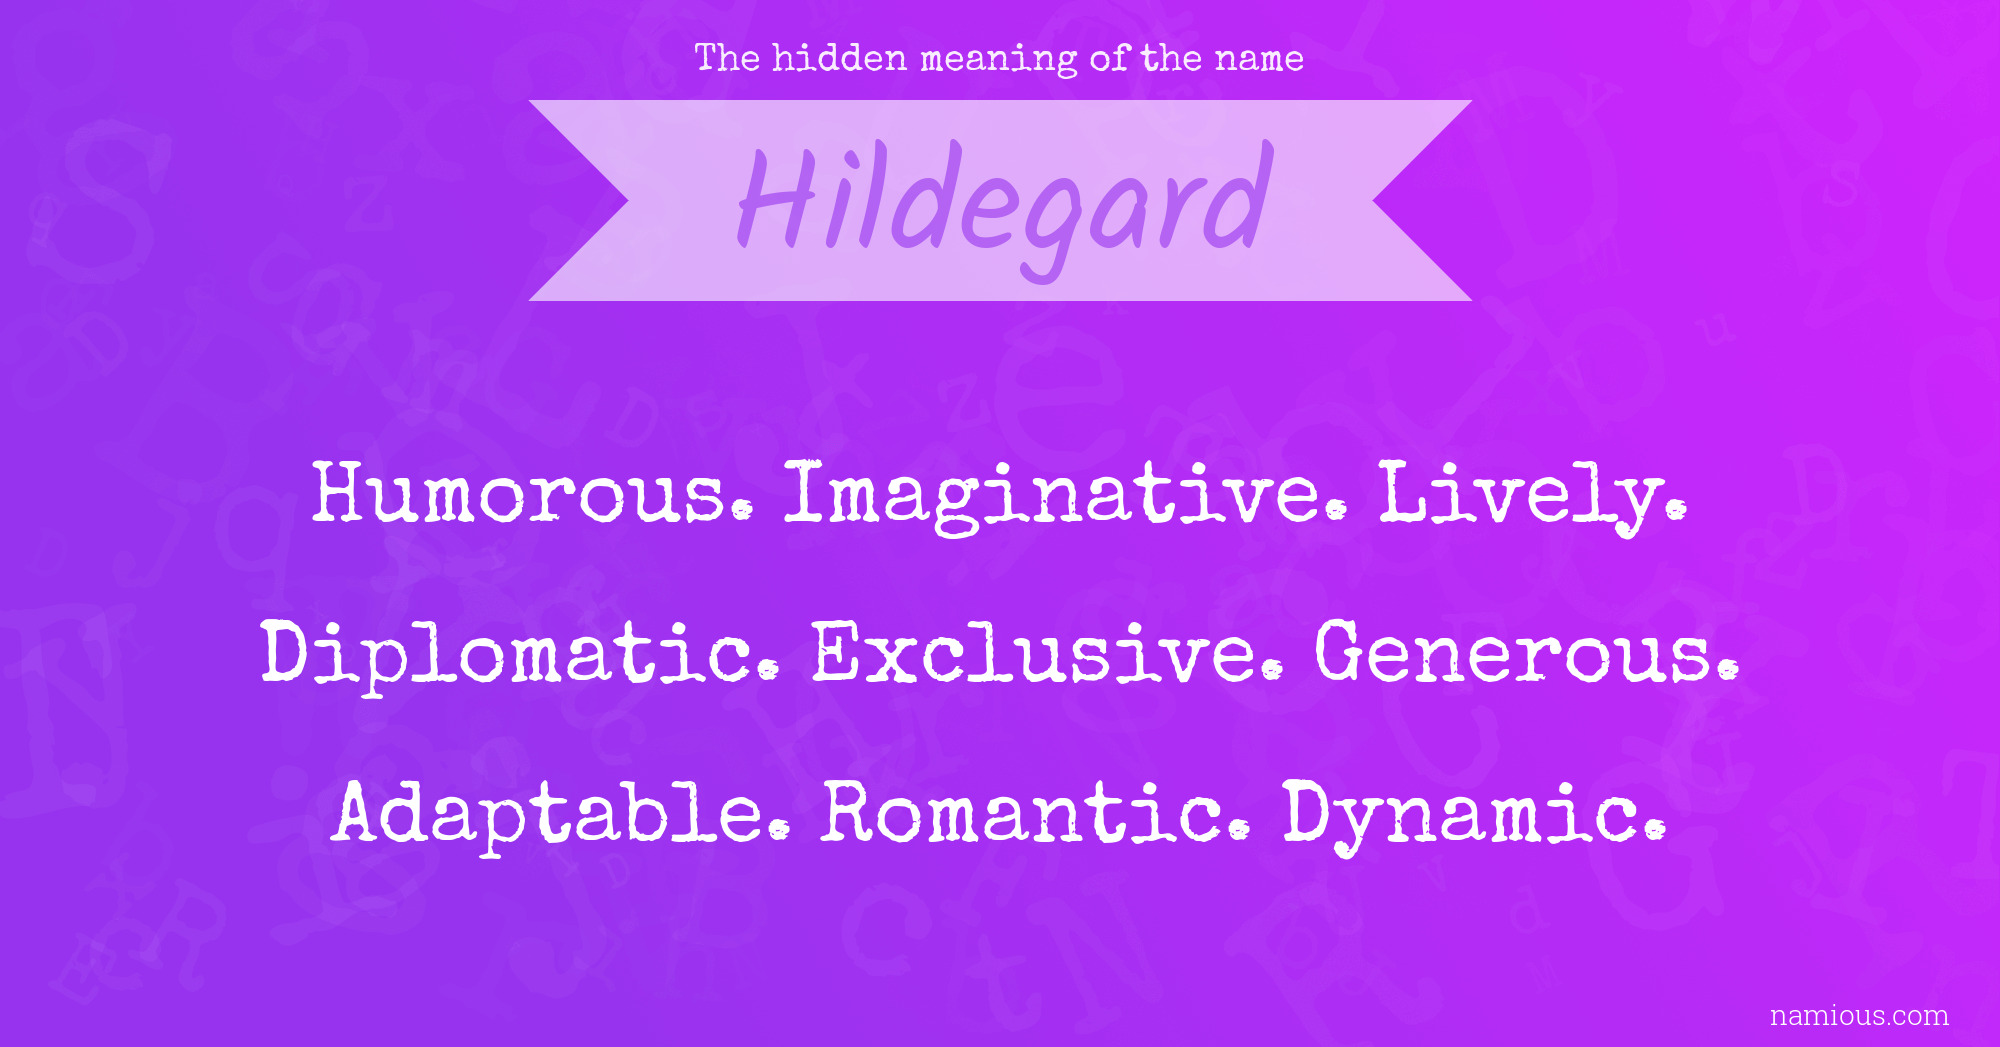 The hidden meaning of the name Hildegard